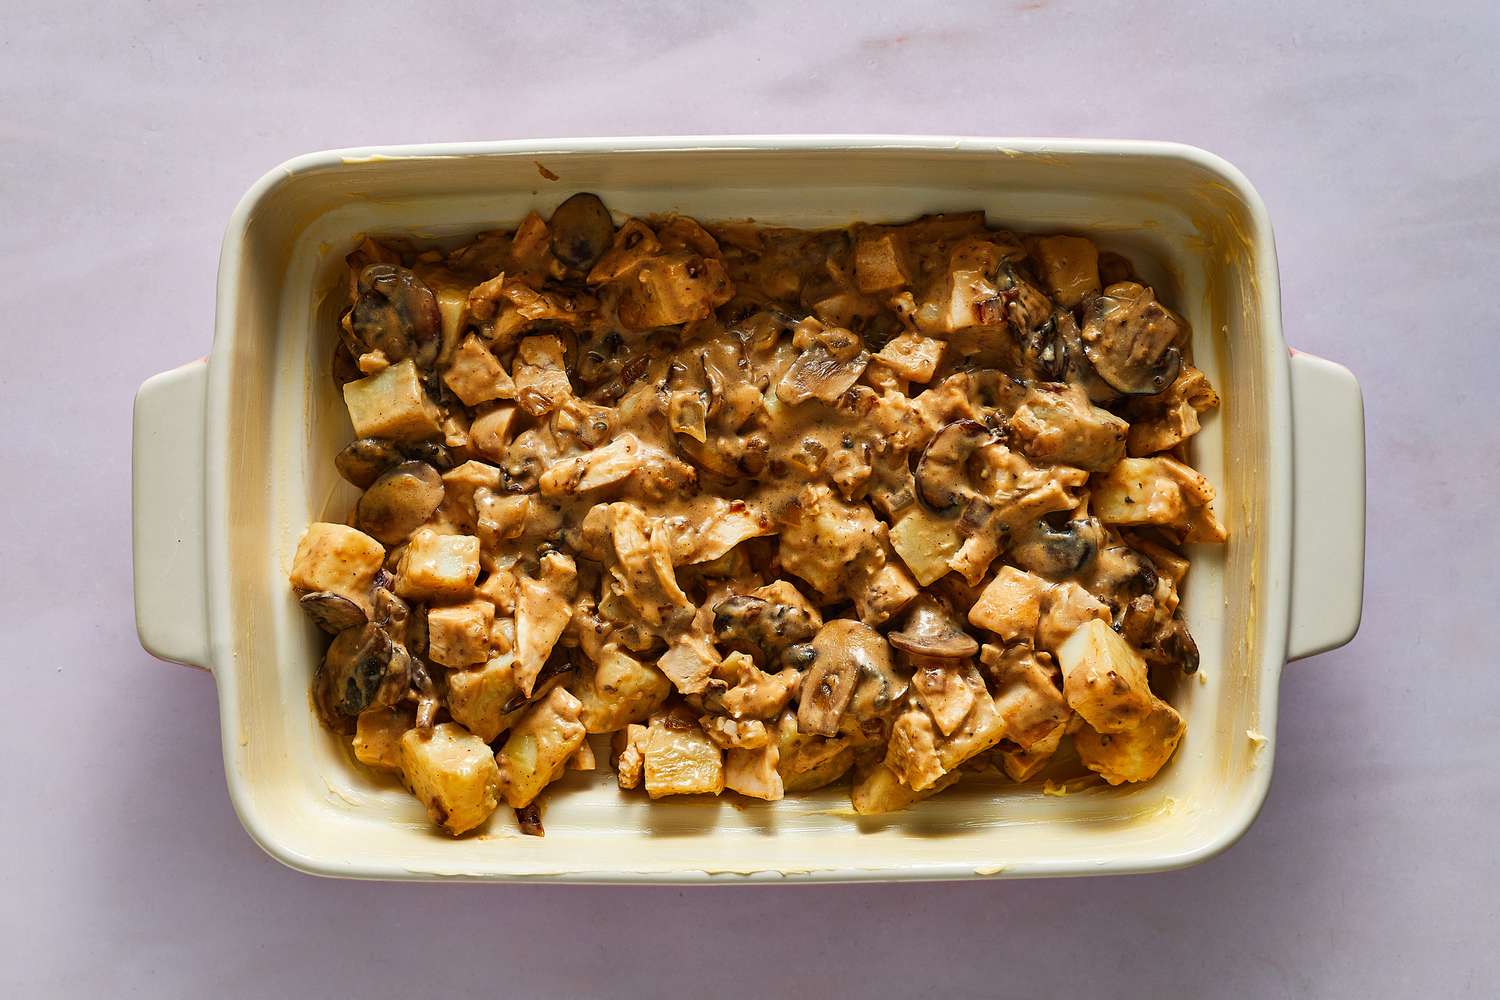 A baking dish with potatoes, chicken, and creamy mushrooms